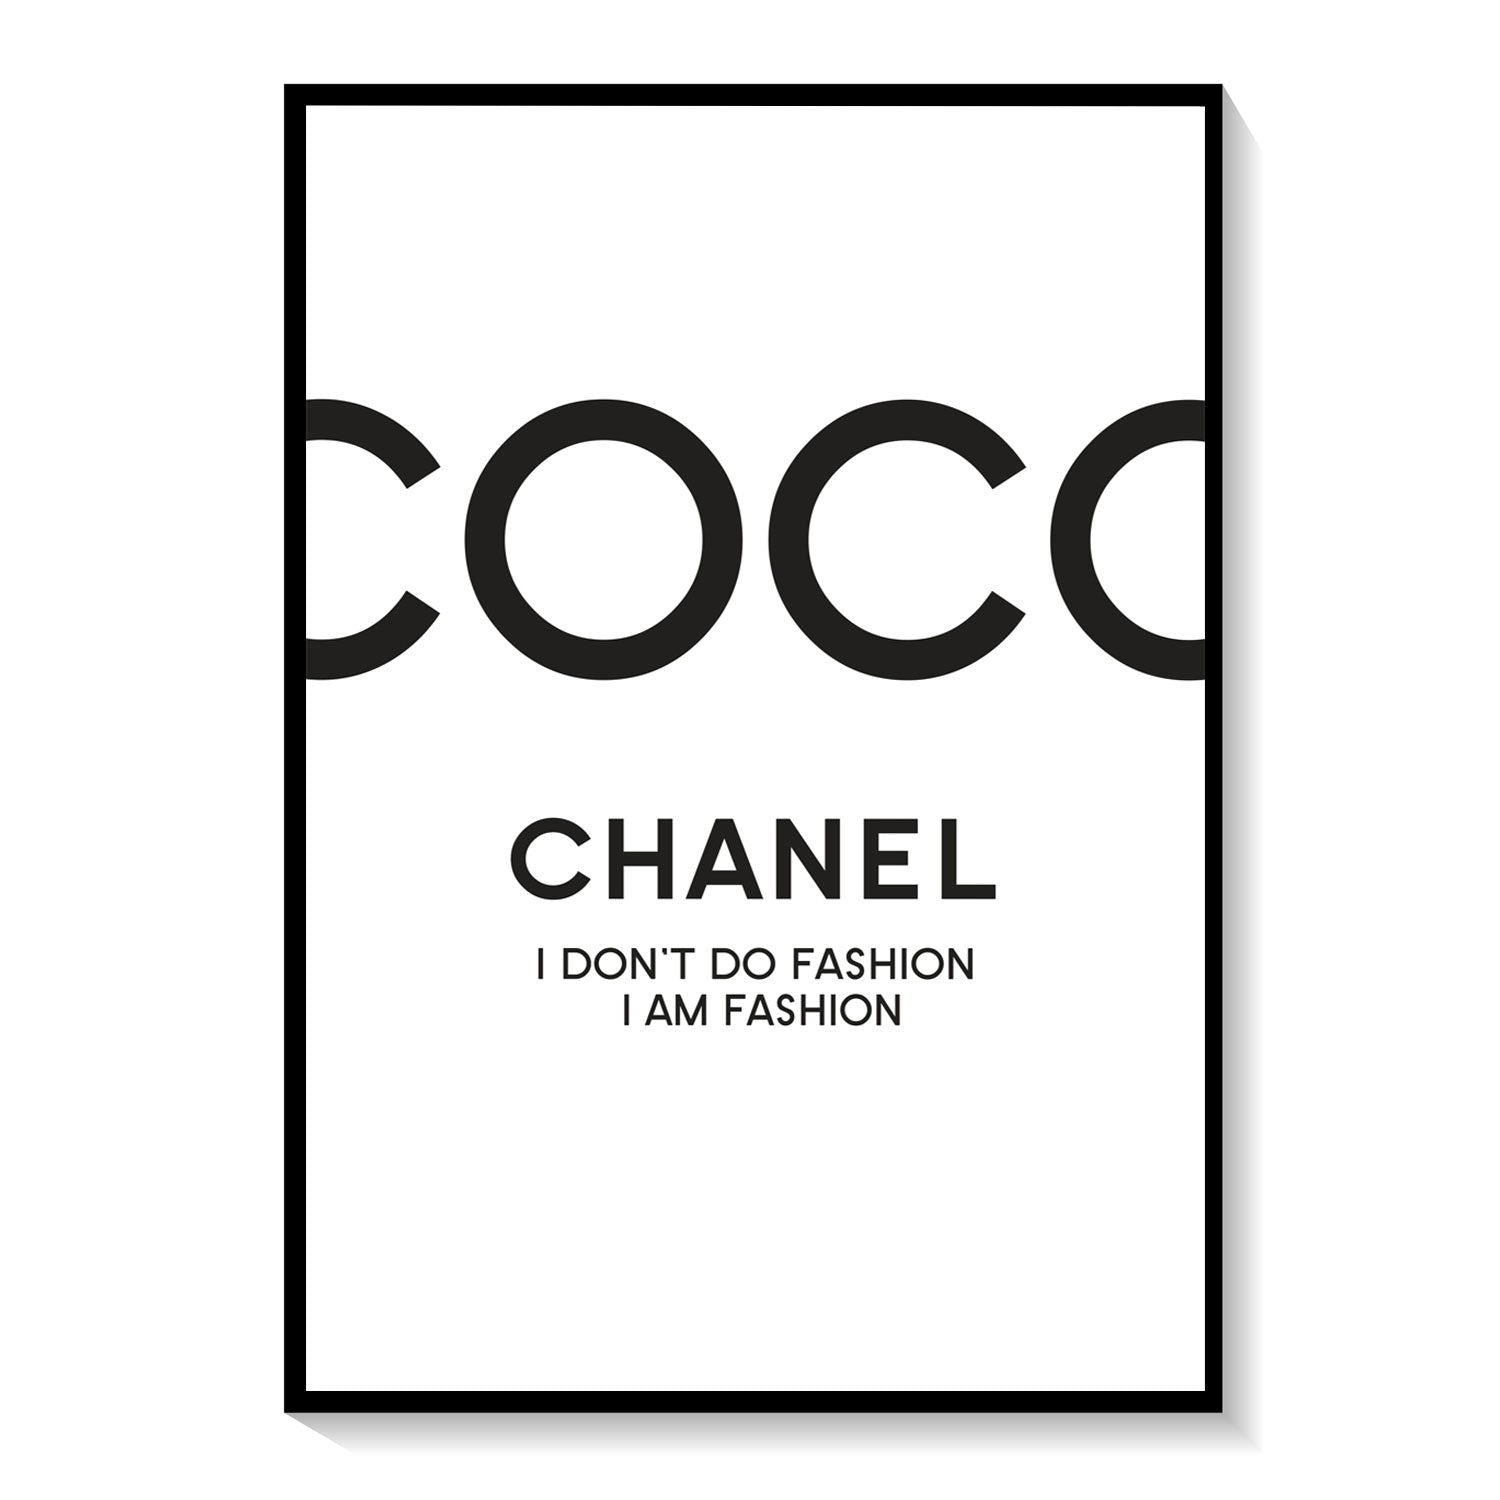 Coco Chanel poster  Posters with fashion citations  deseniocom